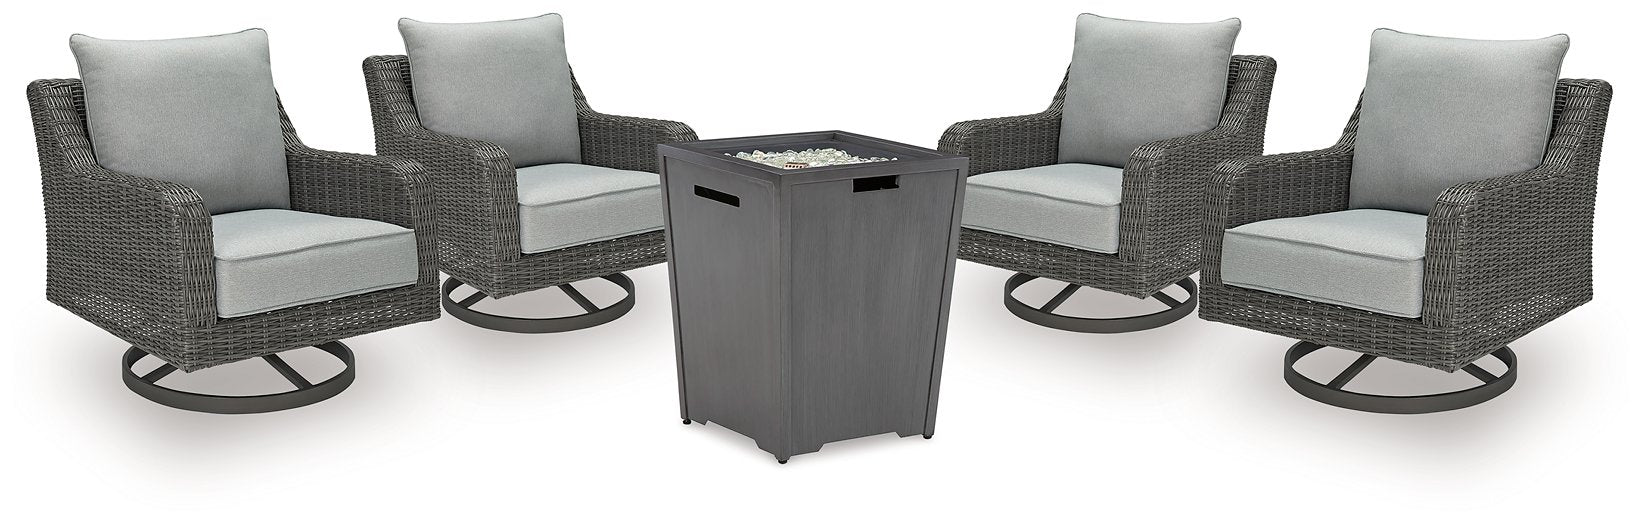 Rodeway South Outdoor Set Outdoor Seating Set Ashley Furniture